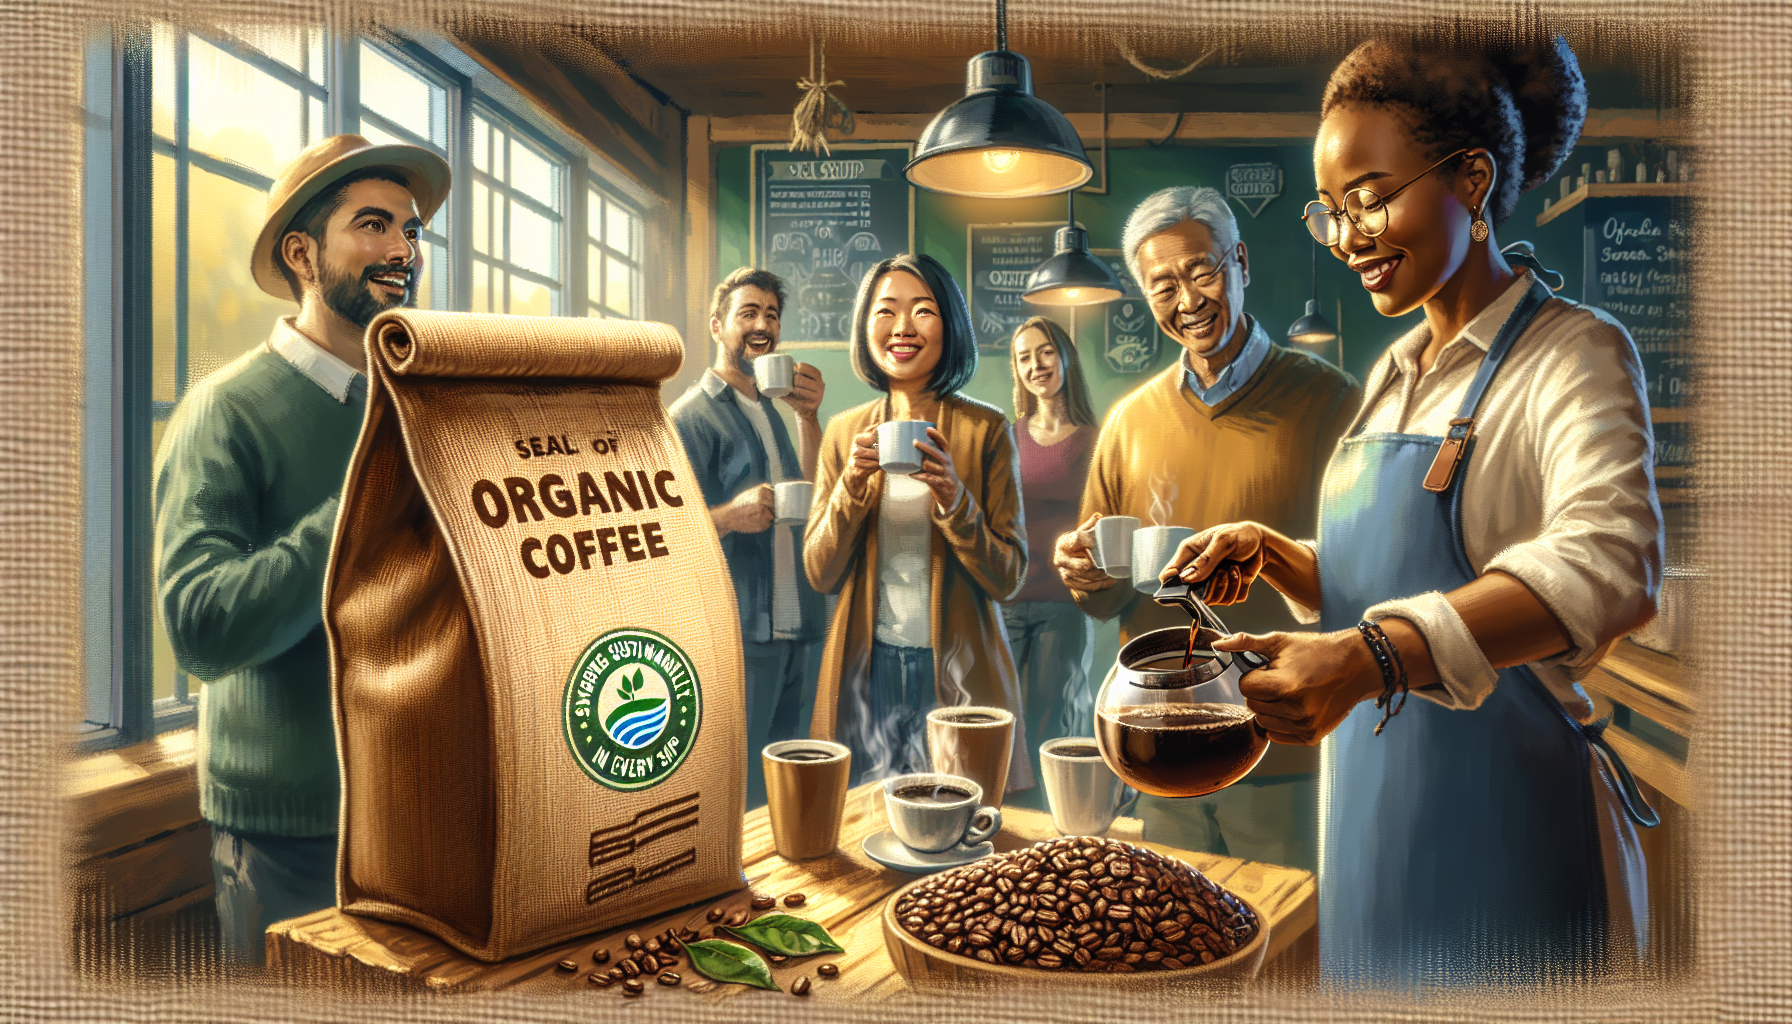 Paint a peaceful café scene, with a South Asian barista skillfully brewing a fresh pot of organic coffee. The beans are glistening and fragrant, displaying a seal of sustainability on the bag. Custome